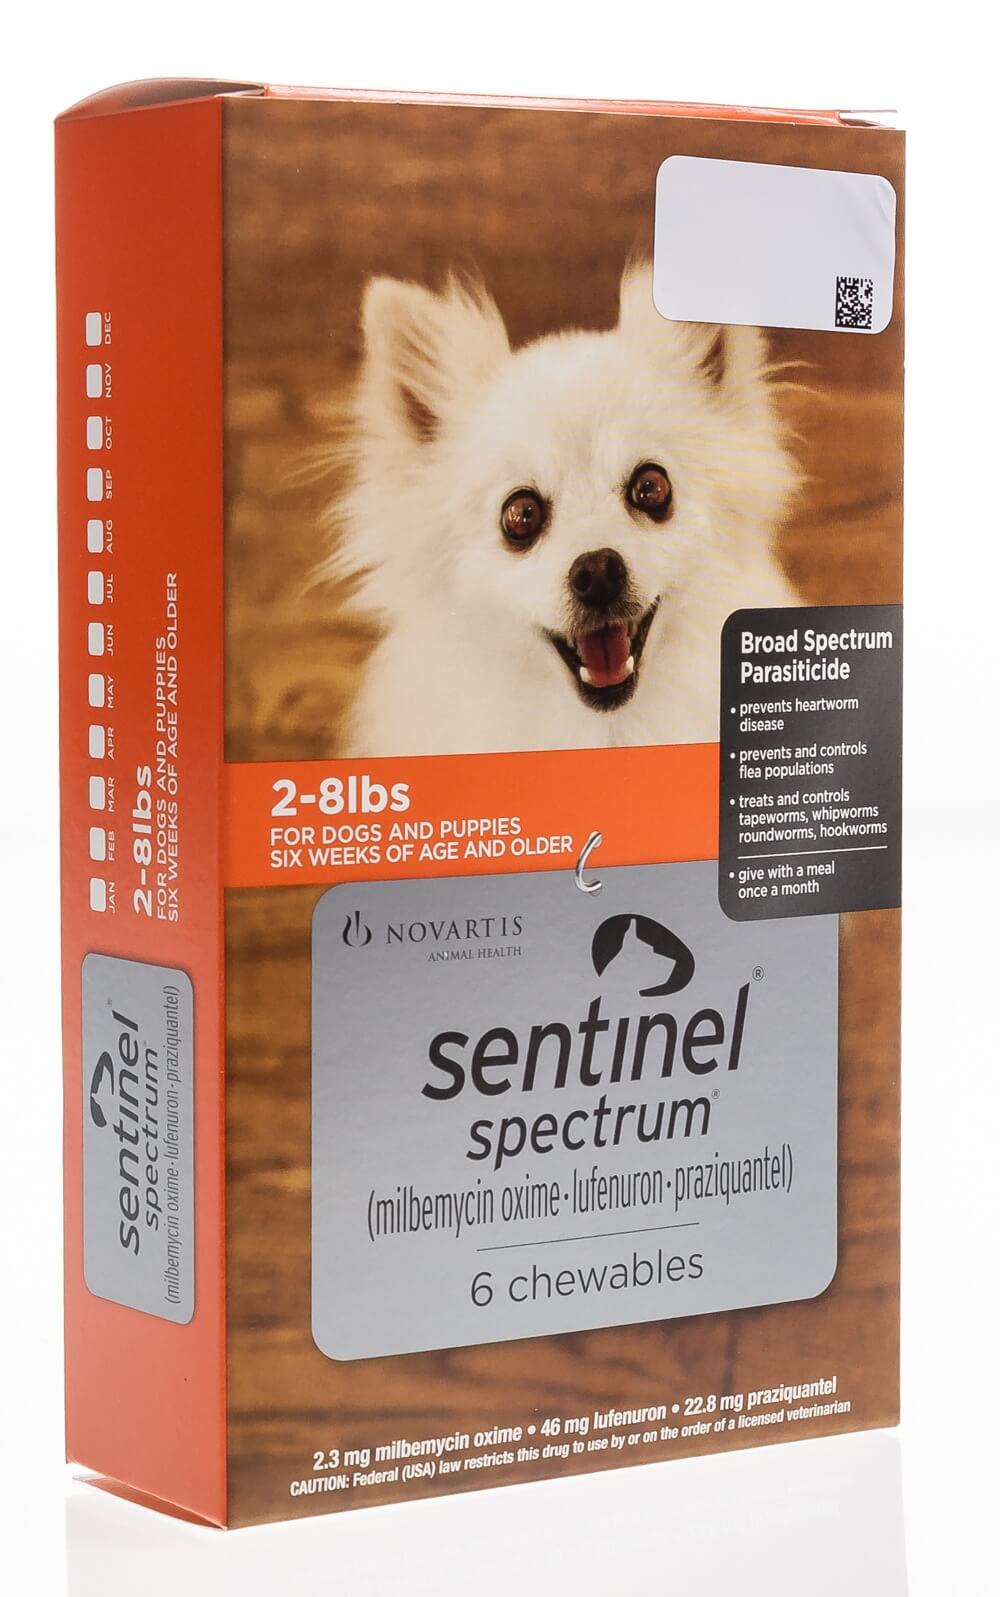 side effects of sentinel spectrum for dogs